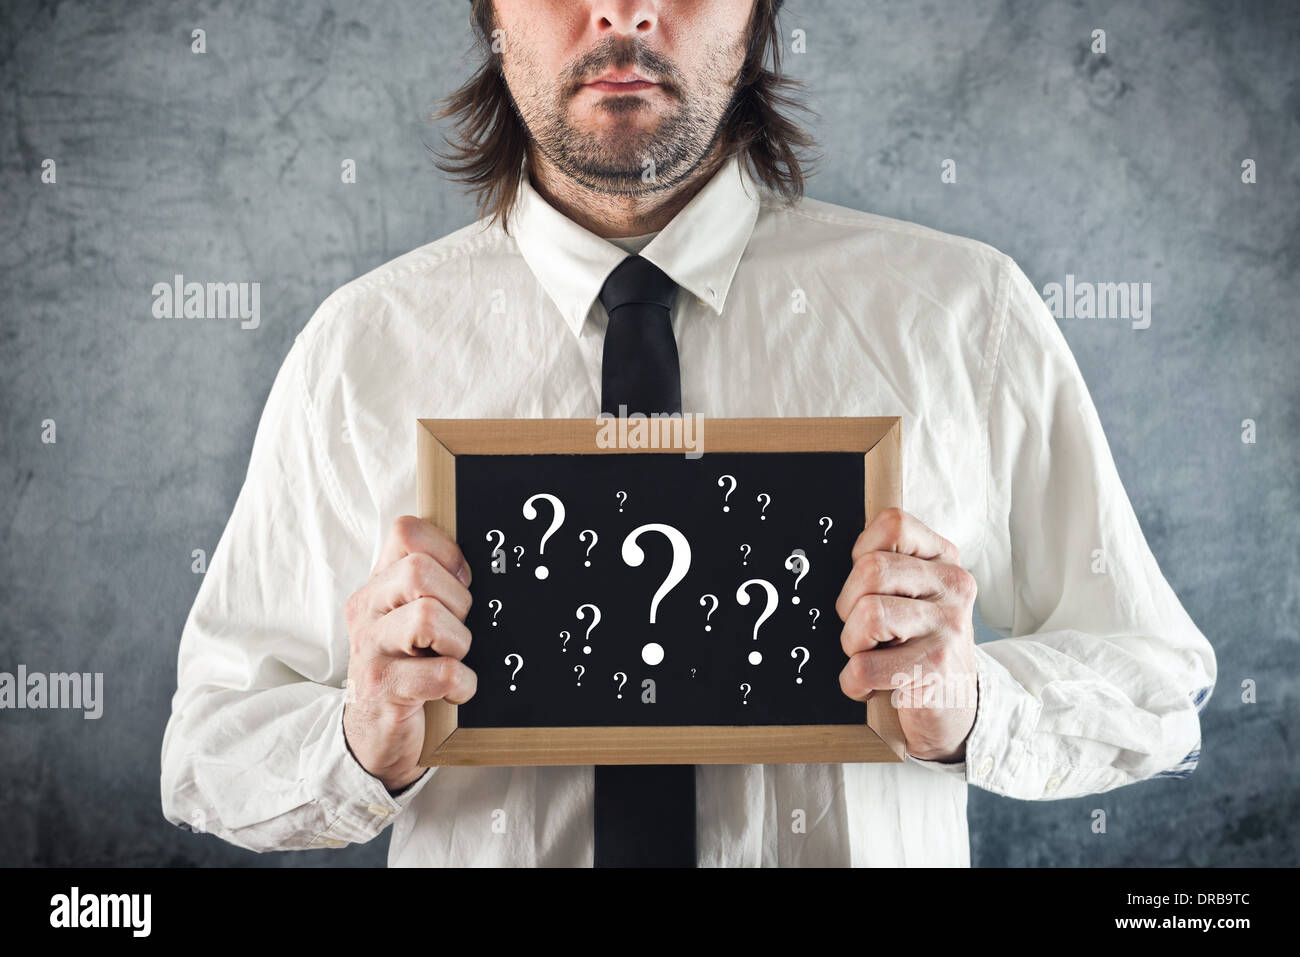 Businessman holding blackboard with question marks. Business questioning. Stock Photo